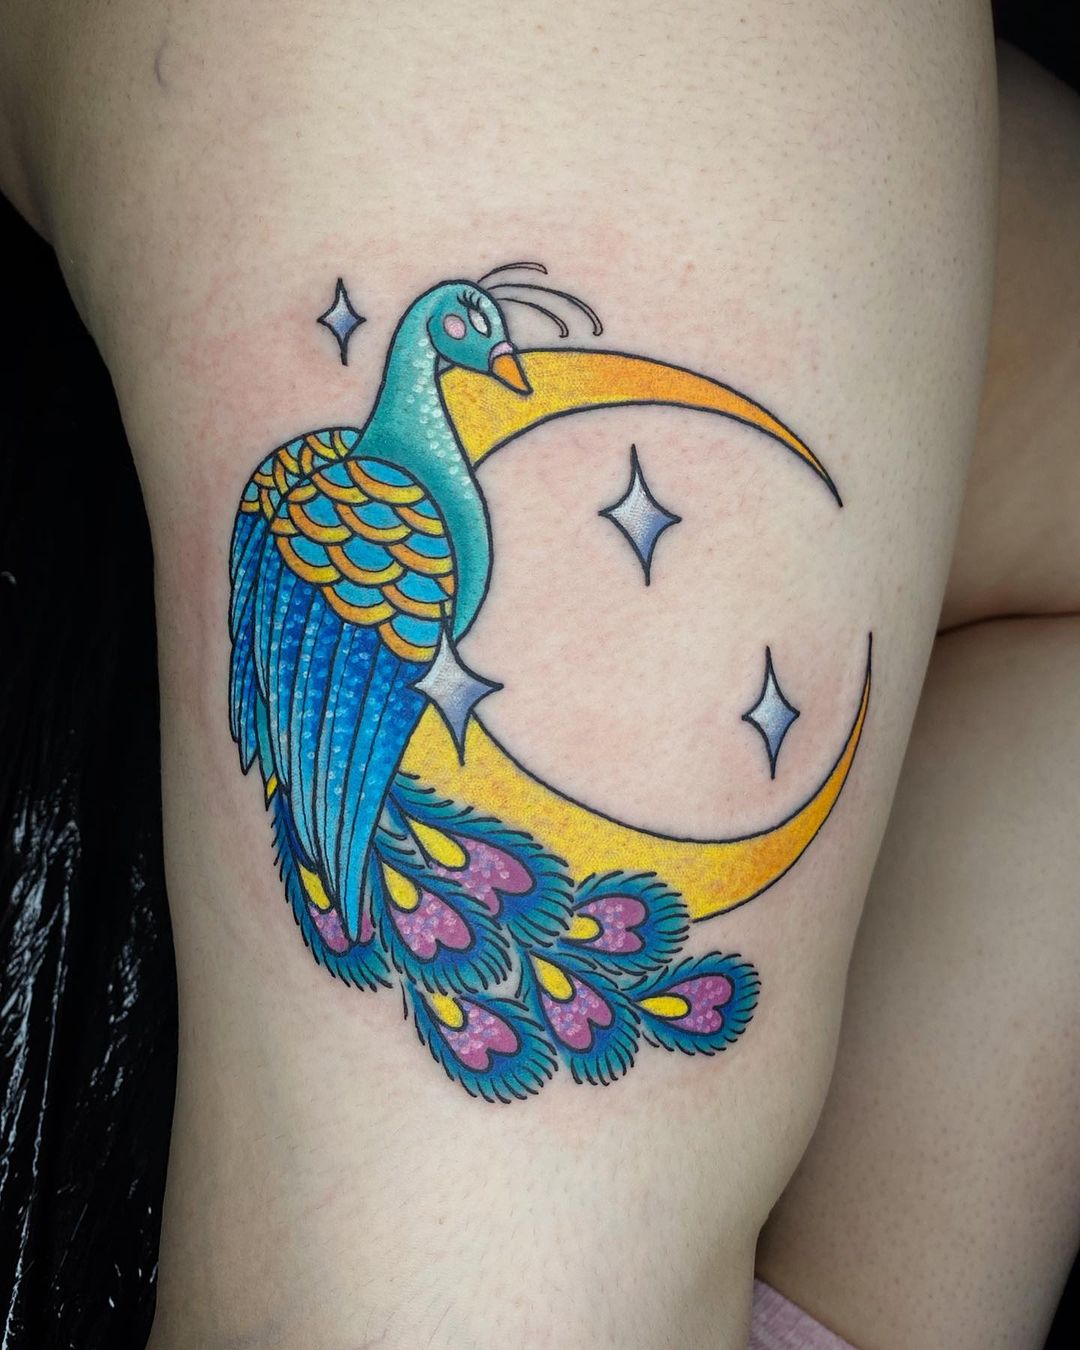 25 glitter tattoos that bring the sparkle